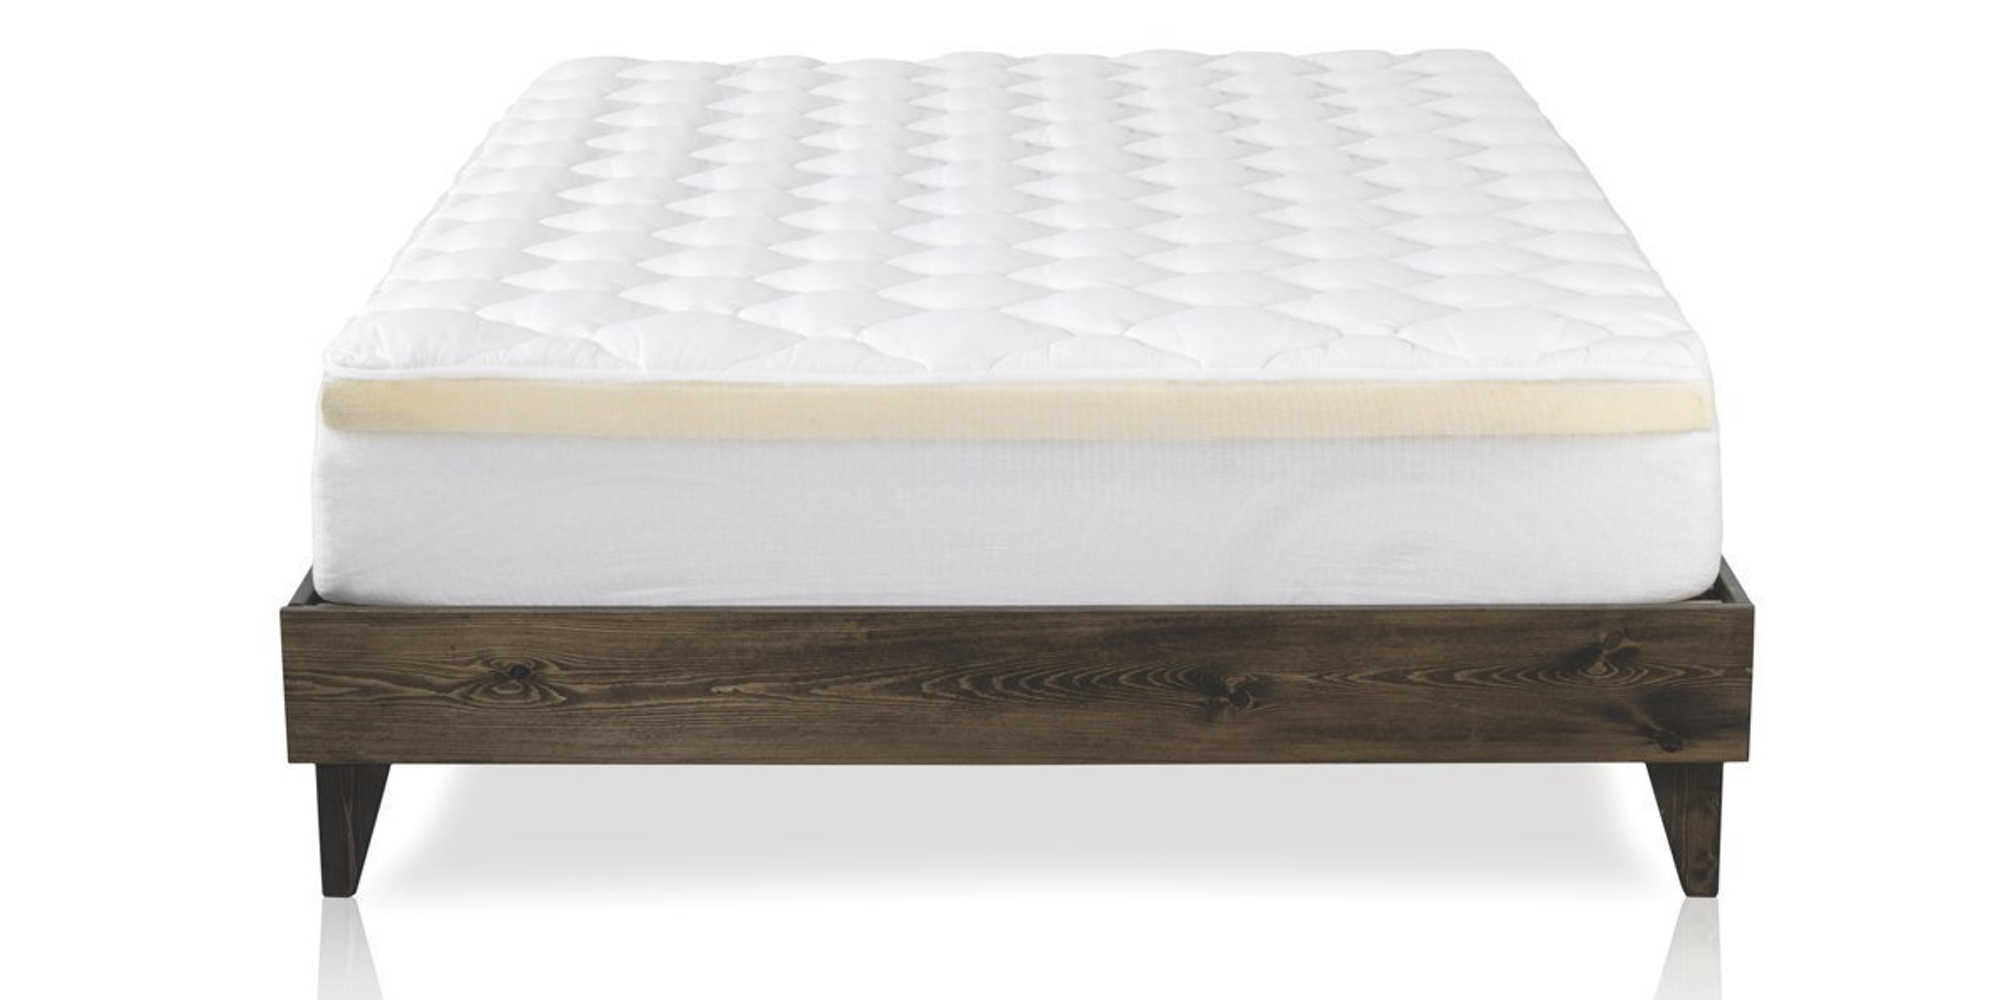 thick mattress pad bed bath and beyond